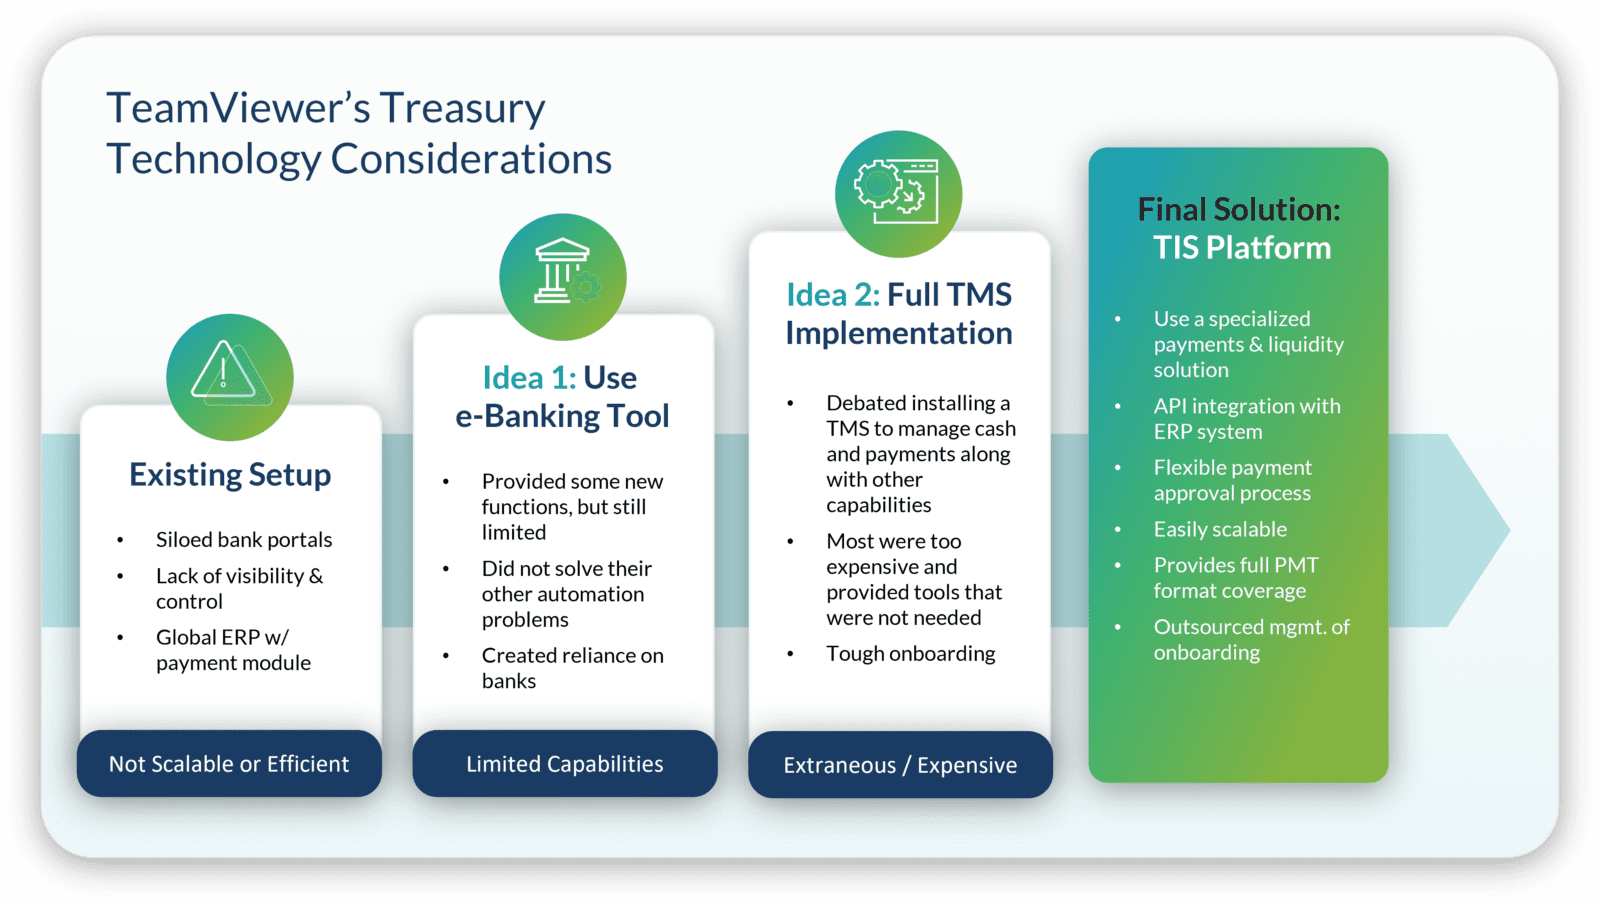 An overview of TeamViewer's treasury technology considerations as they began evaluating their new project. 